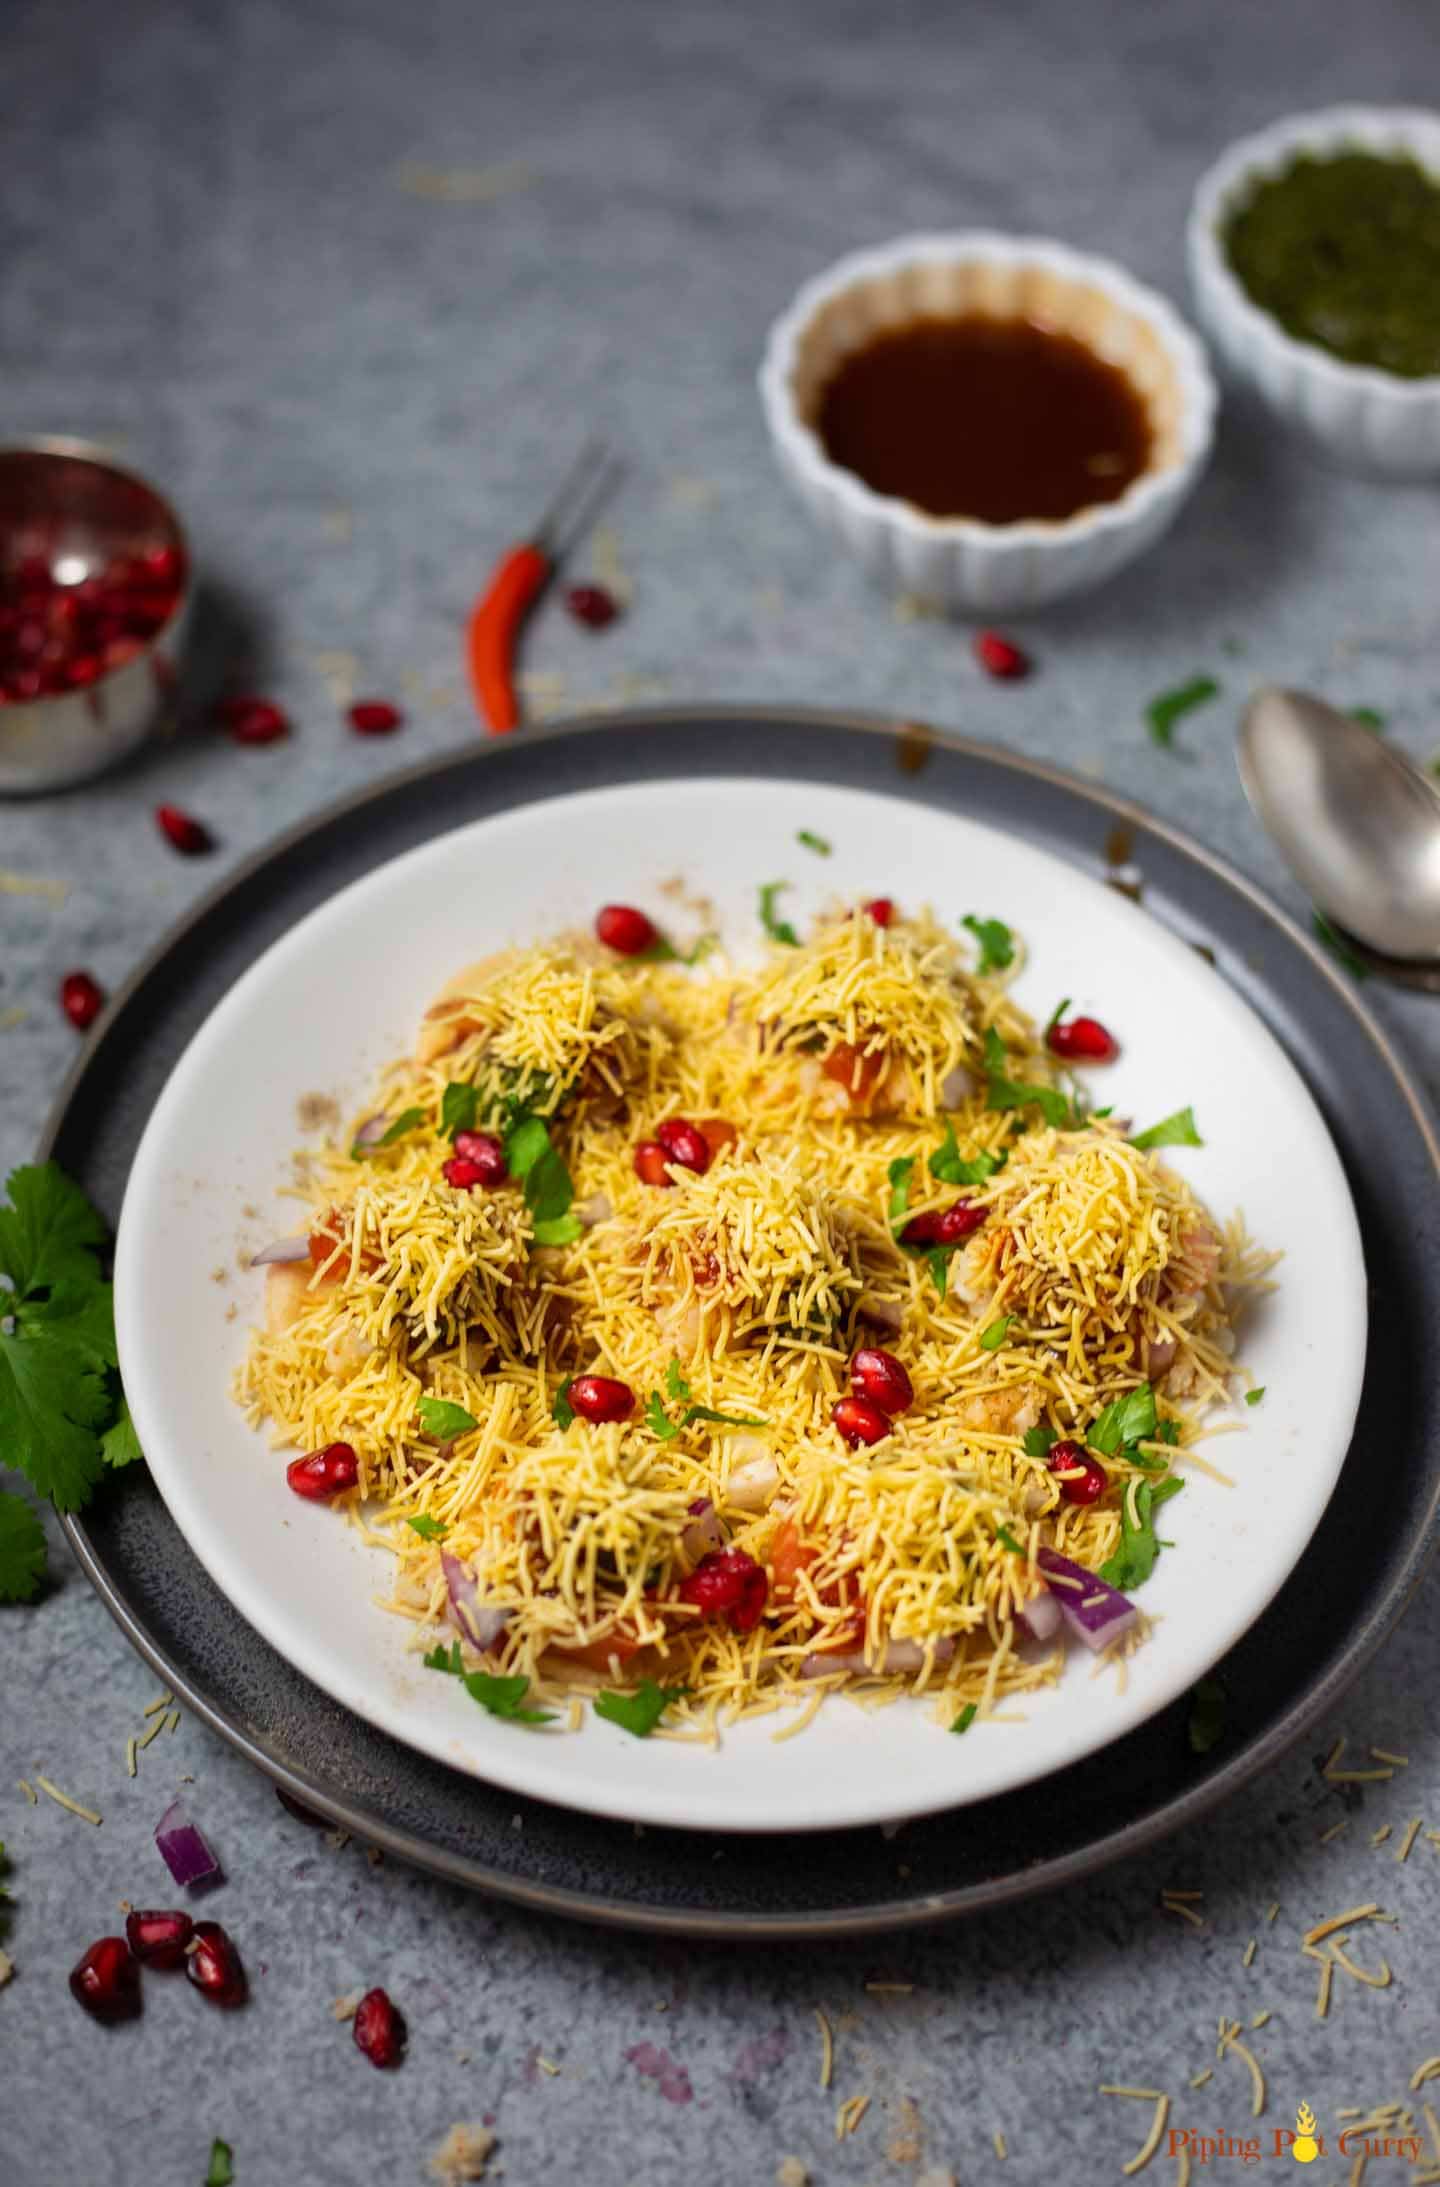 Sev puri street chaat in a white plate with chutneys spread around 